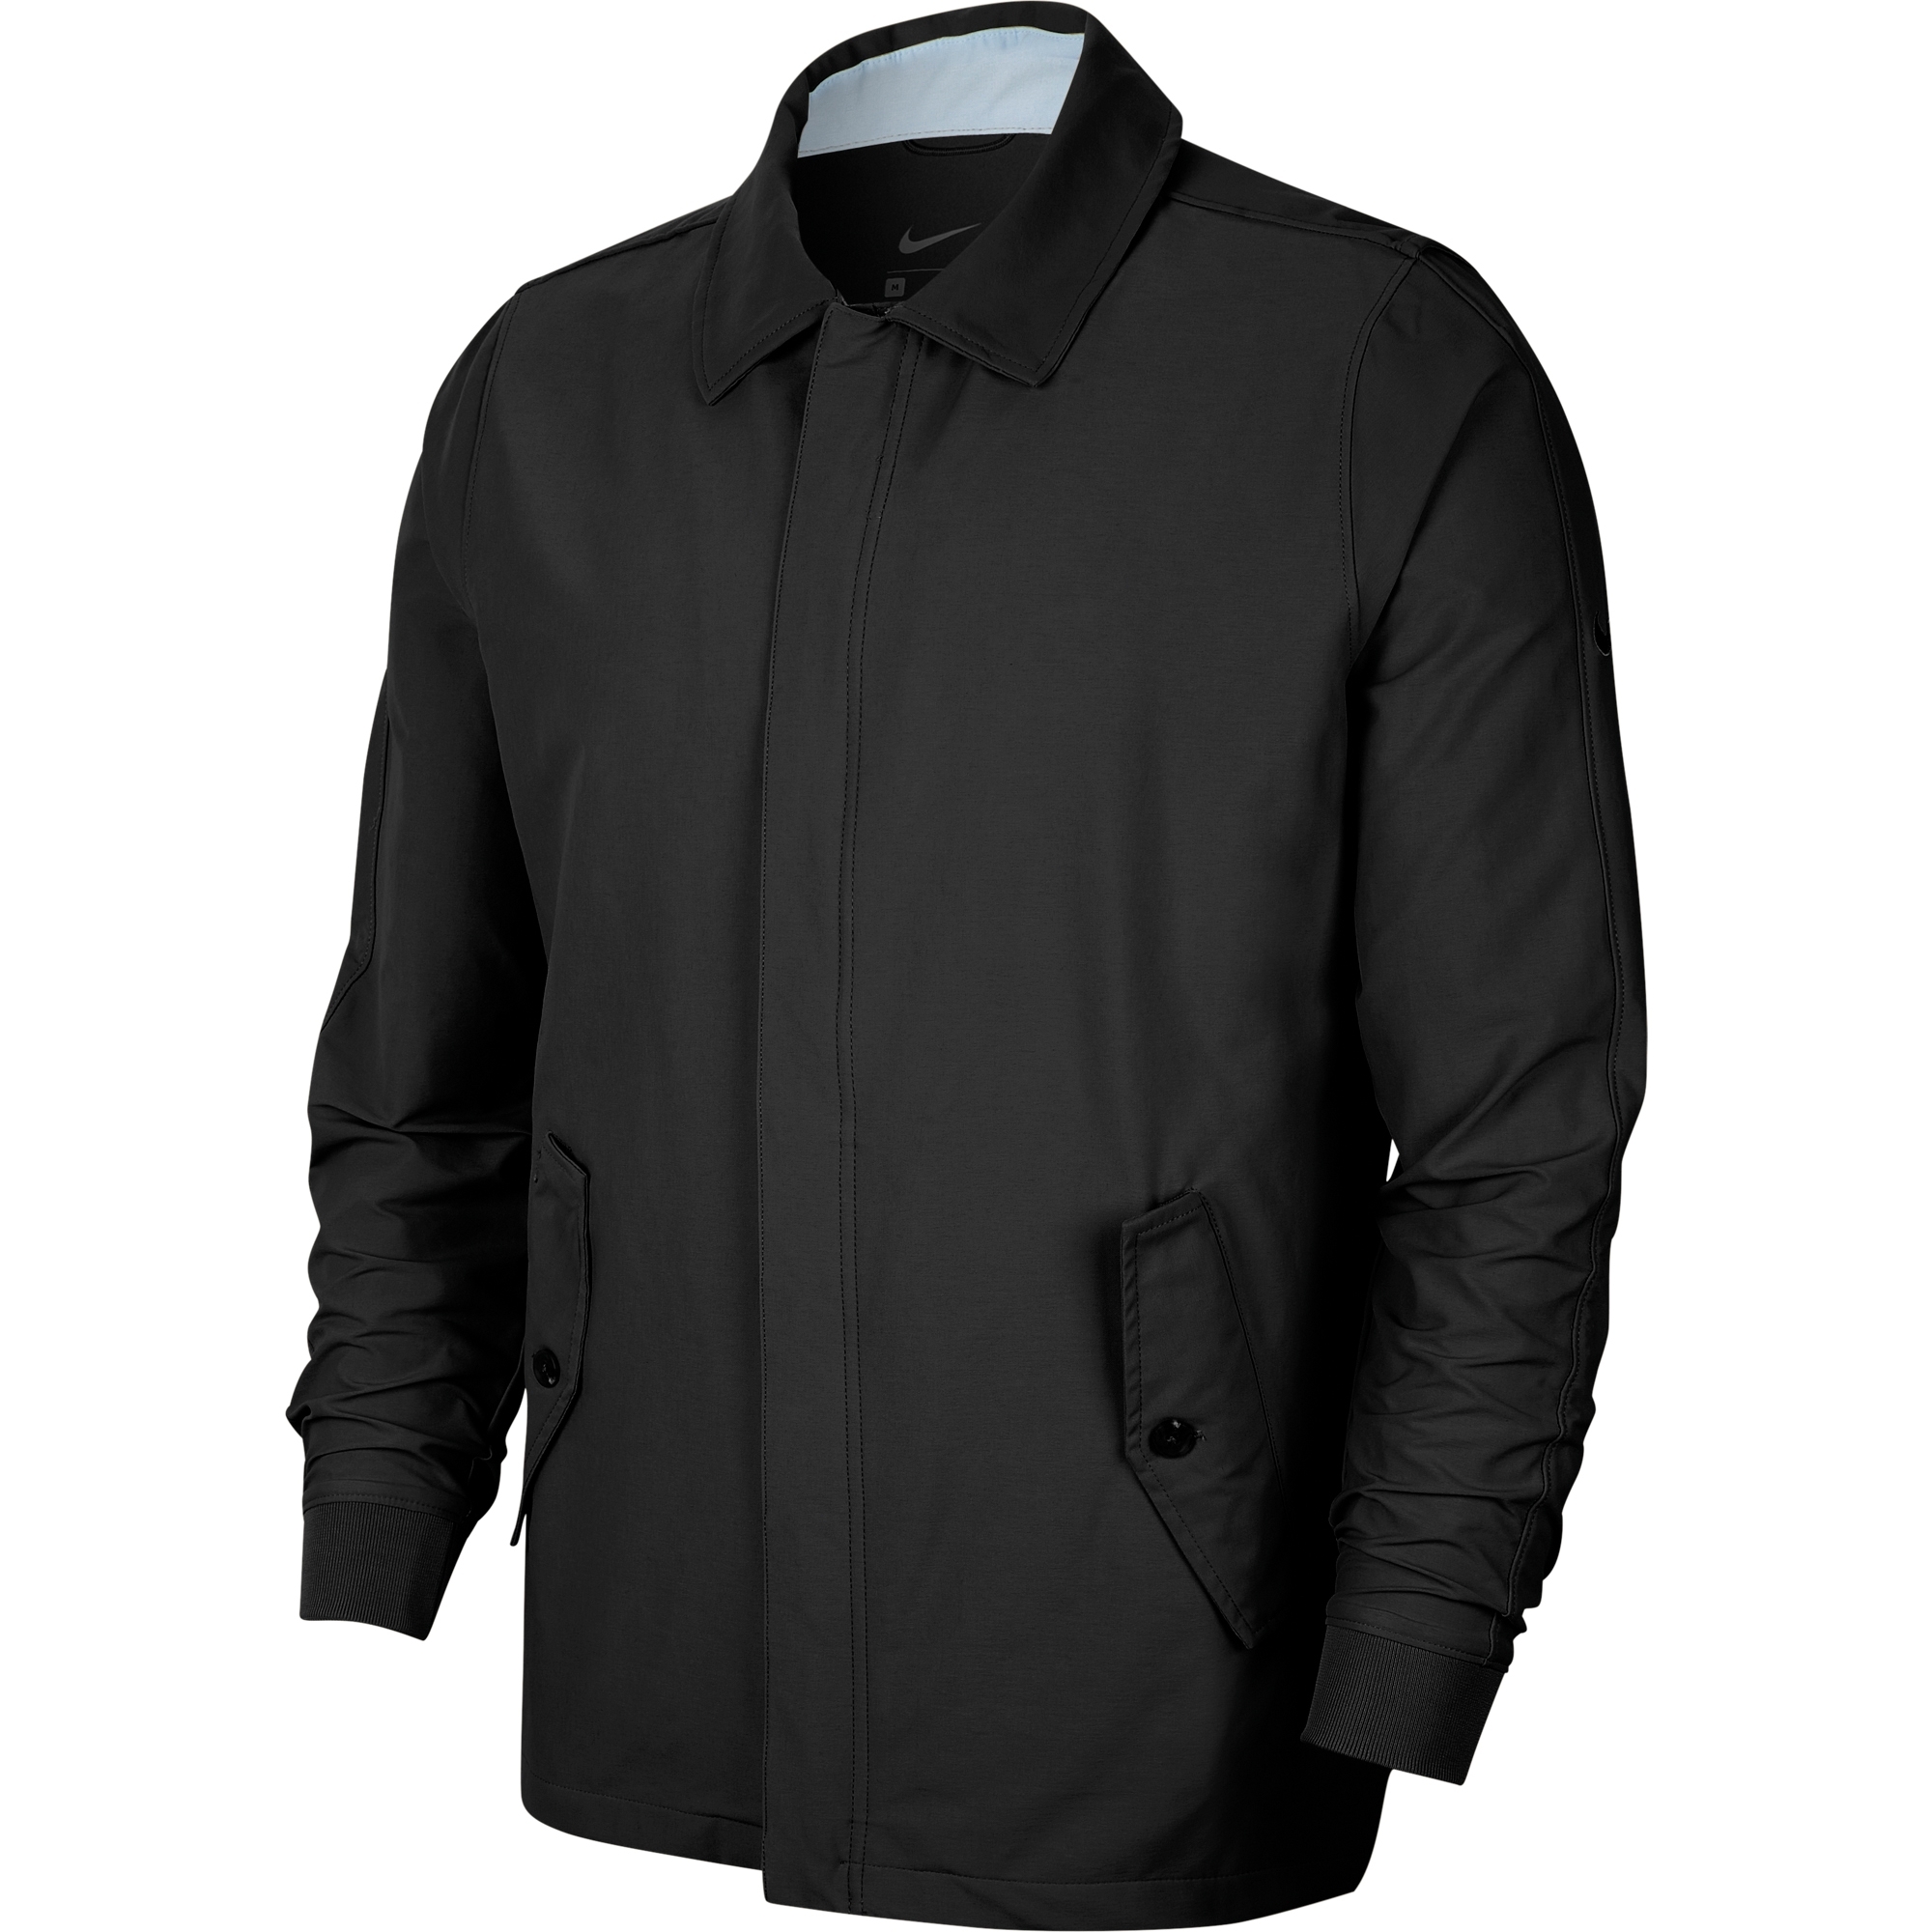 Nike Mens Repel Players Water Repellent Active Golf Jacket S- Chest 35-37.5